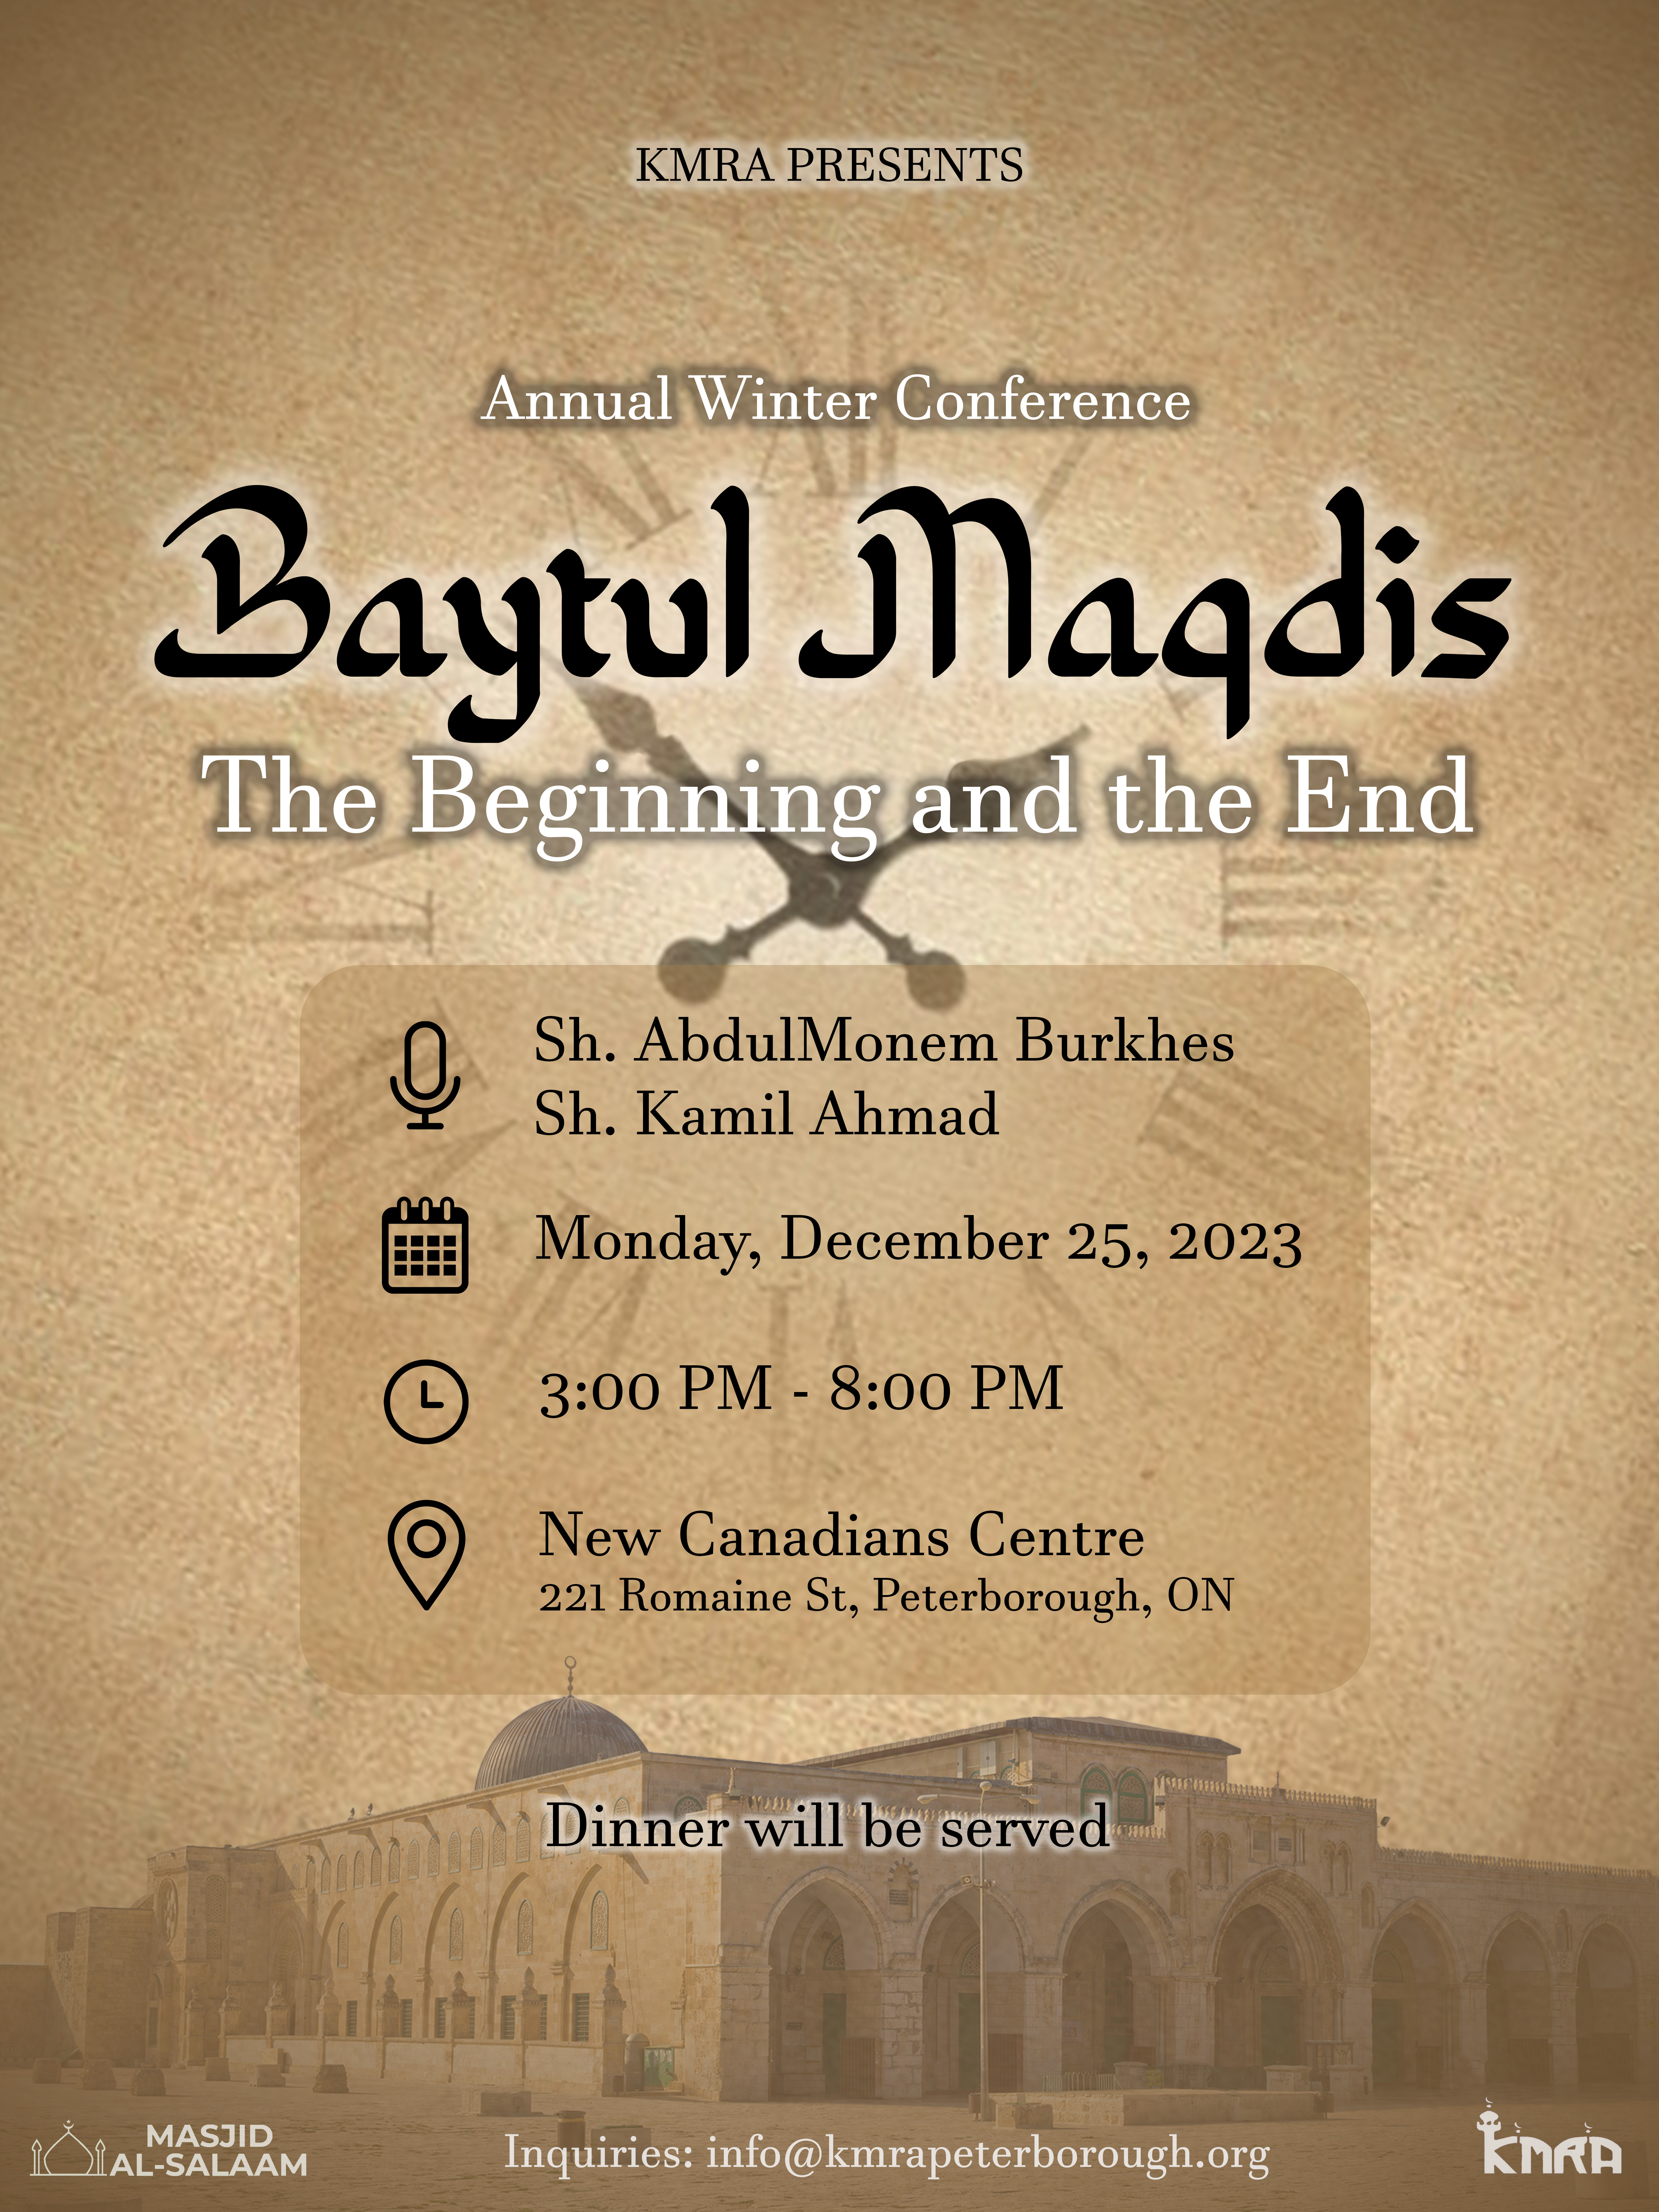 KMRA Islamic Conference 2023: Baytul Maqdis The Beginning and The End 